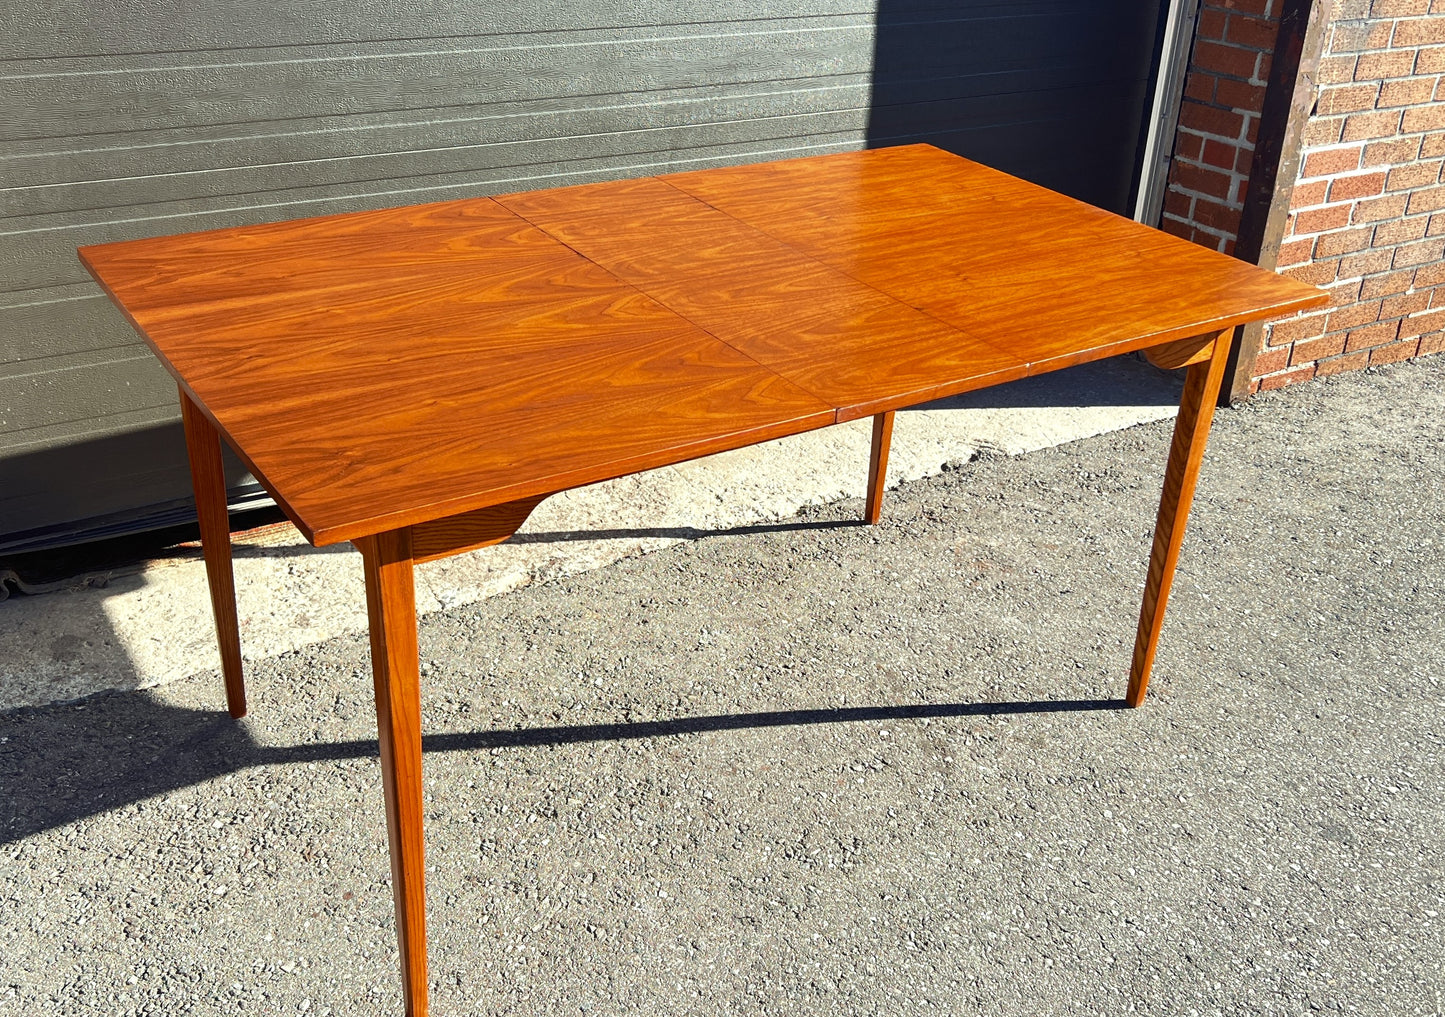 REFINISHED Mid Century Modern Walnut Extendable Dining Table 48"-60"